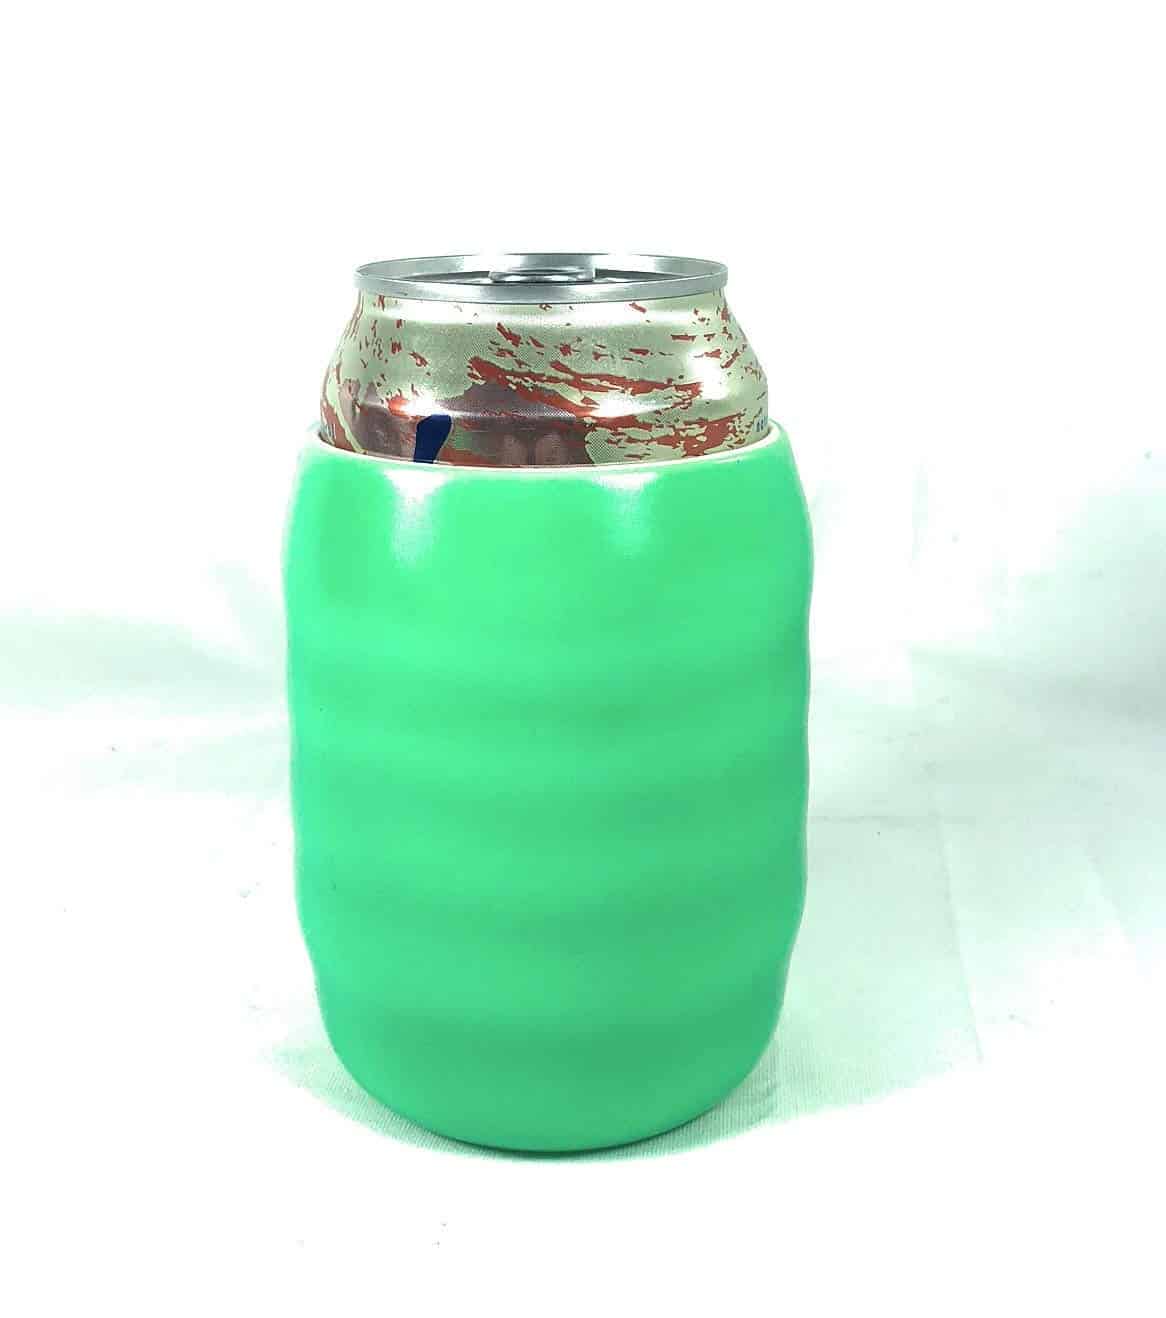 https://www.cableprotectorworks.com/wp-content/uploads/imported/Glow-in-the-Dark-Koozie-Can-Cooler-Sleeve-for-Beer-Soft-Drink-Bright-Green-Glow-B07GDDGWJT-3.jpg